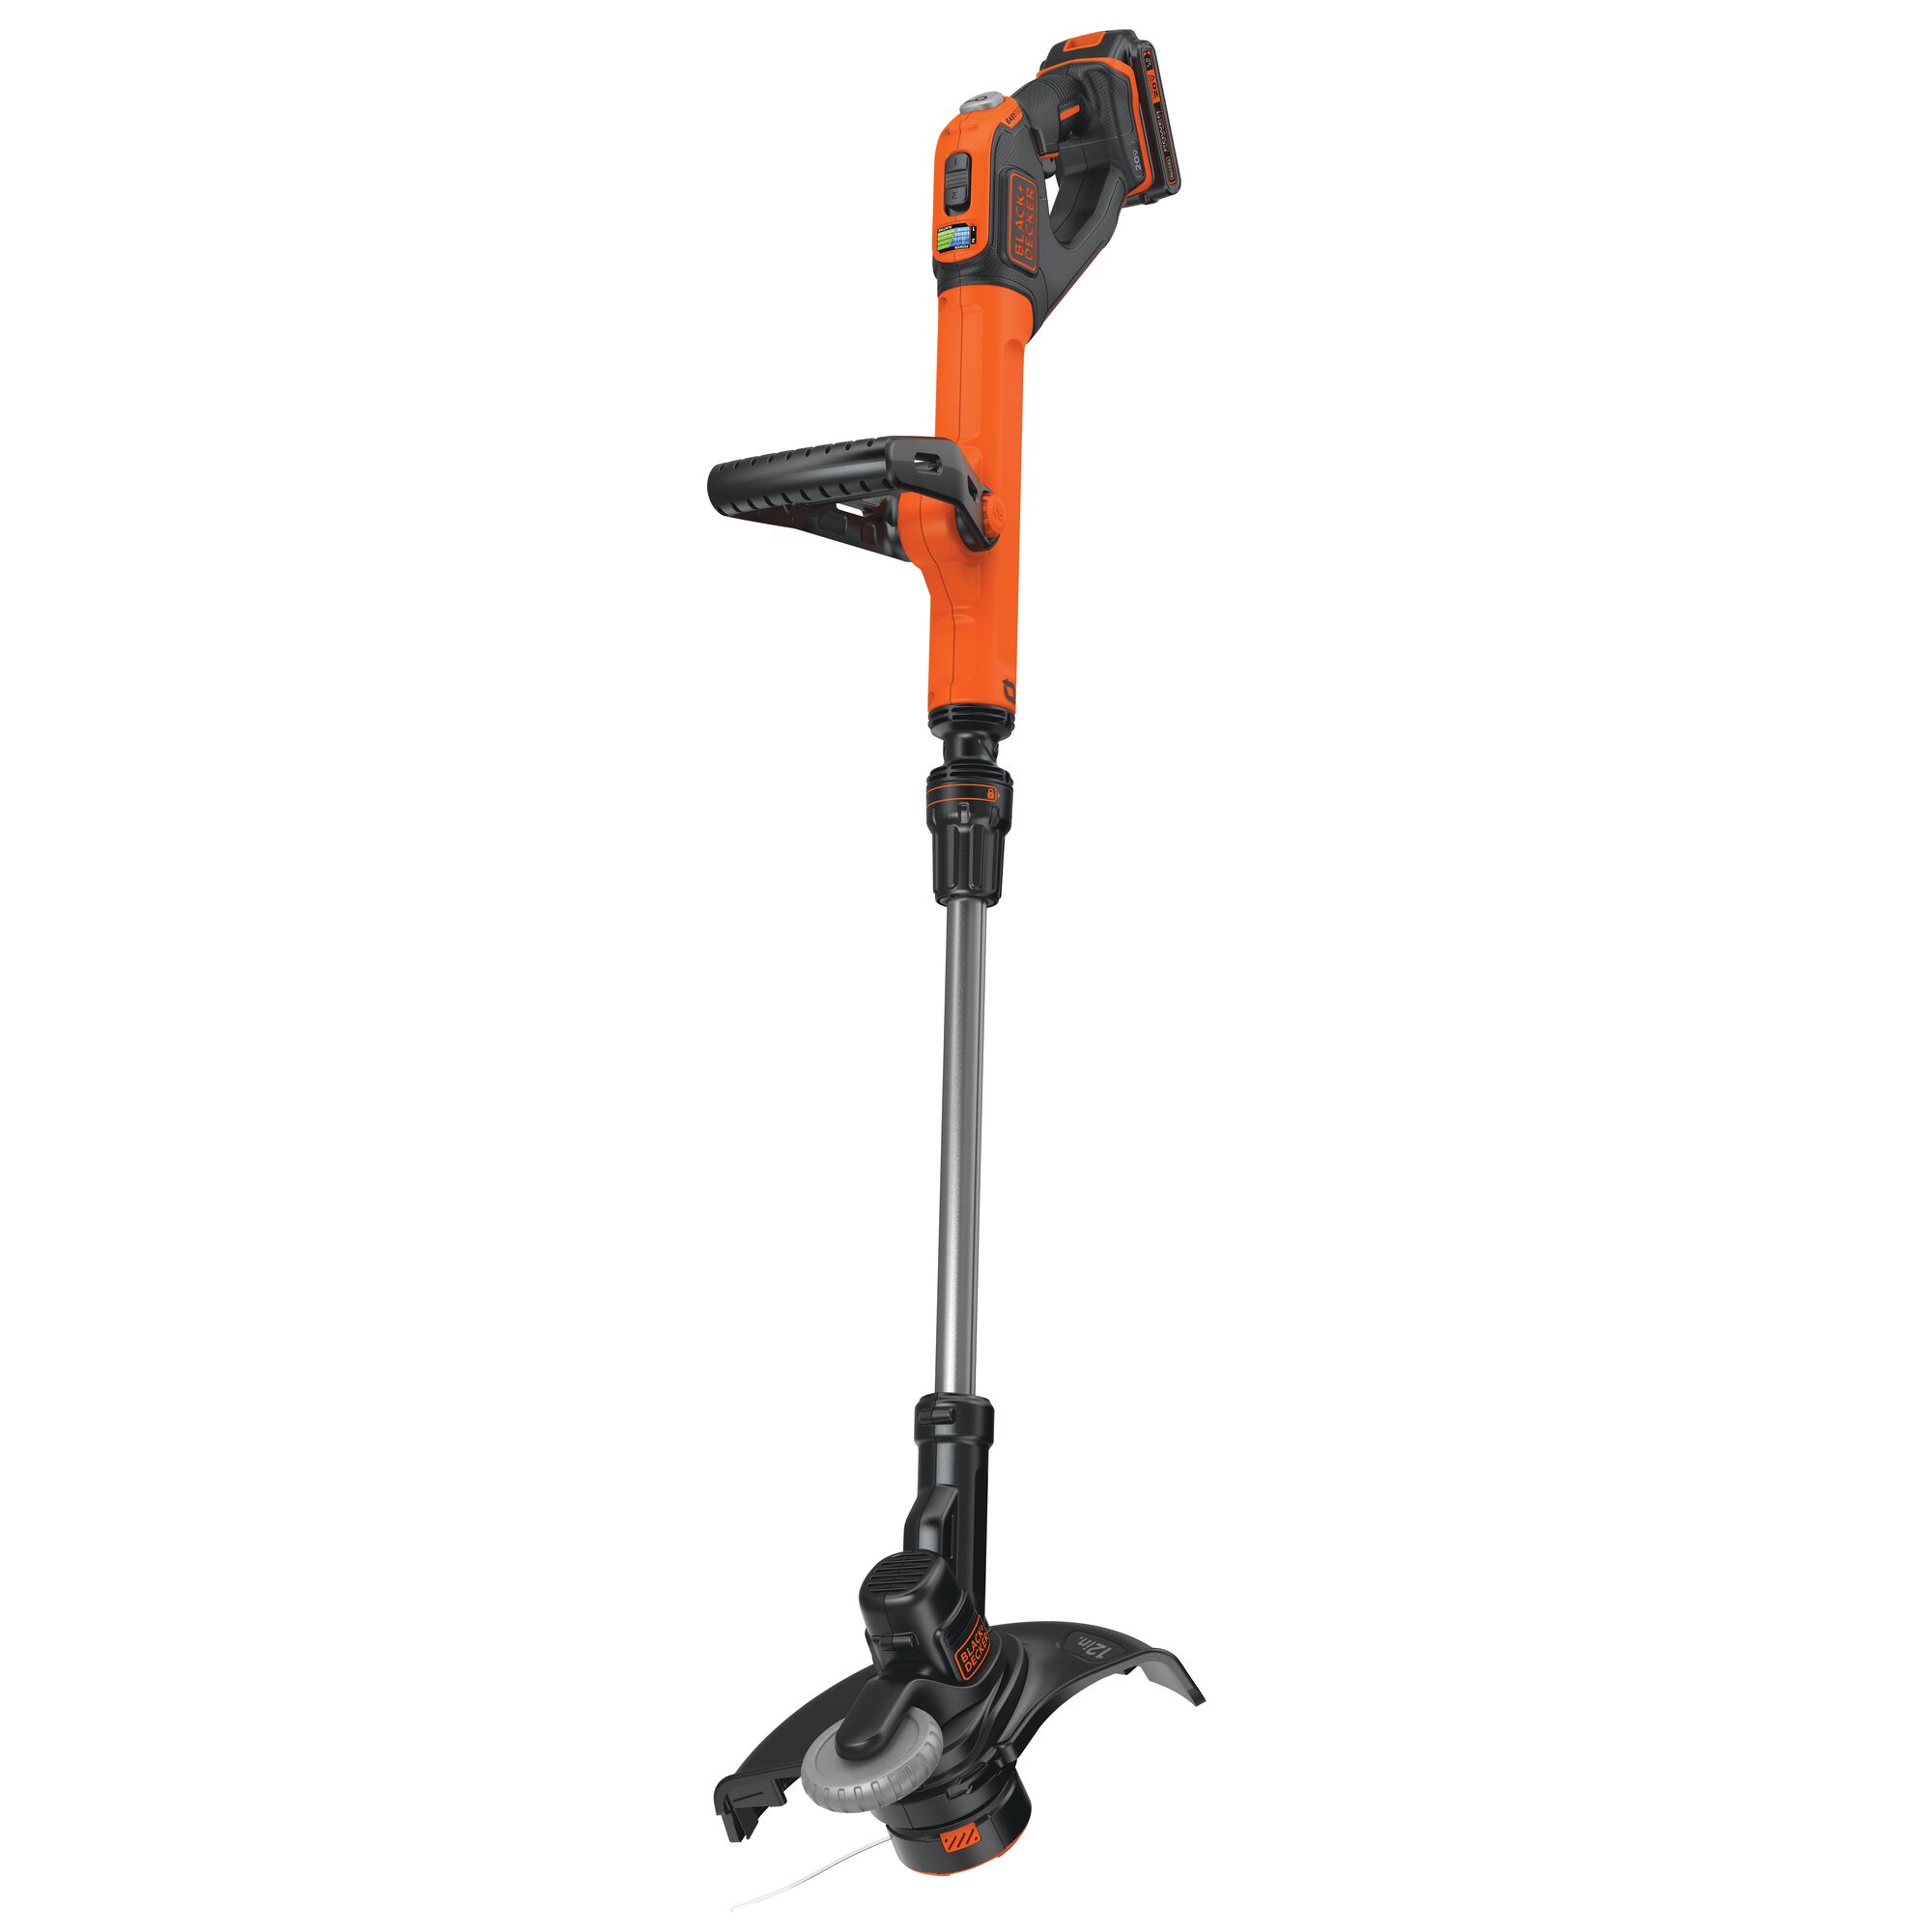 Profile of 20V Max Lithium Easyfeed string Trimmer/Edger on white background.